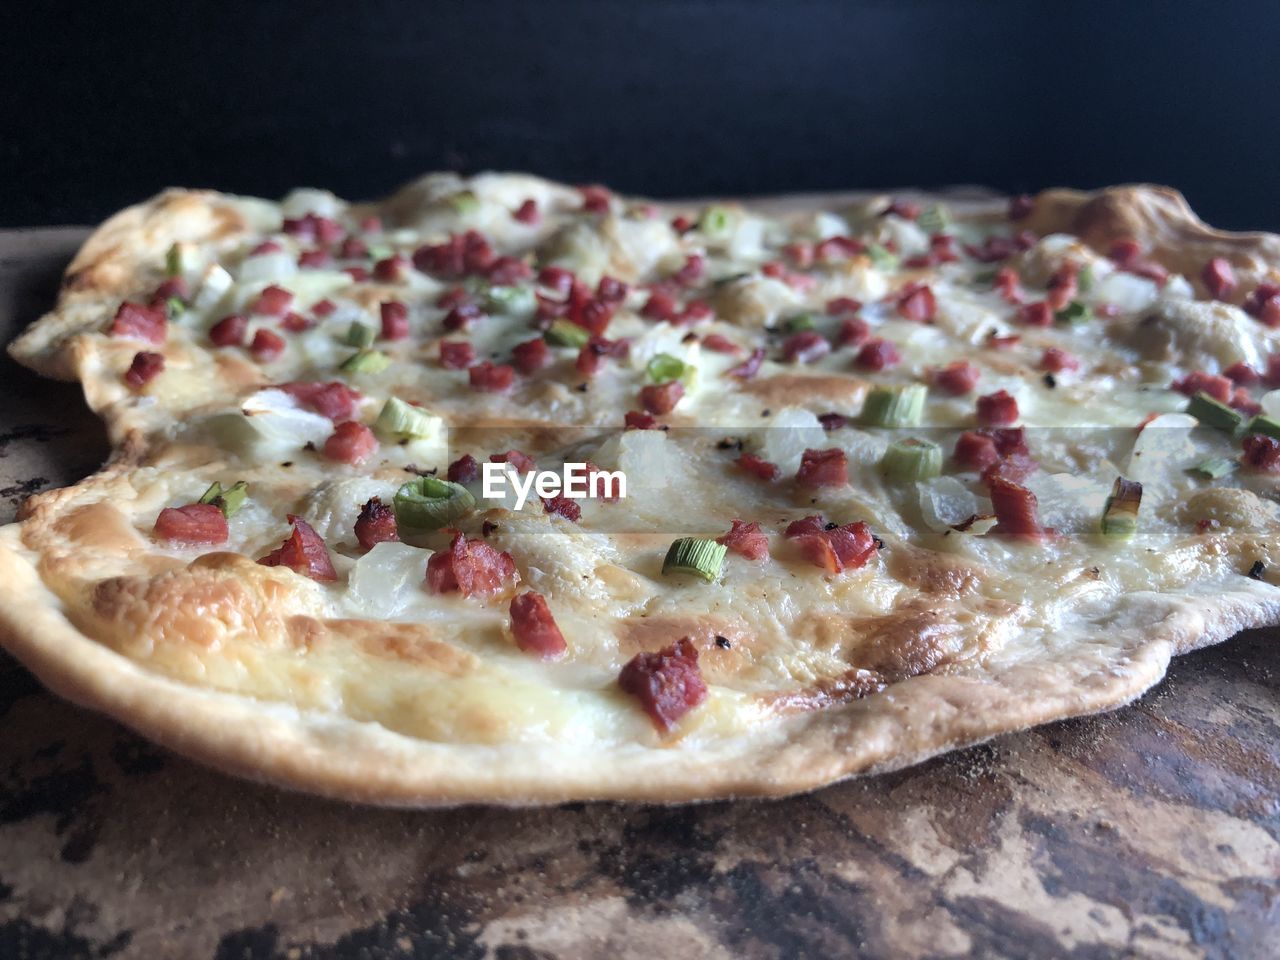 CLOSE-UP OF PIZZA SERVED ON CUTTING BOARD